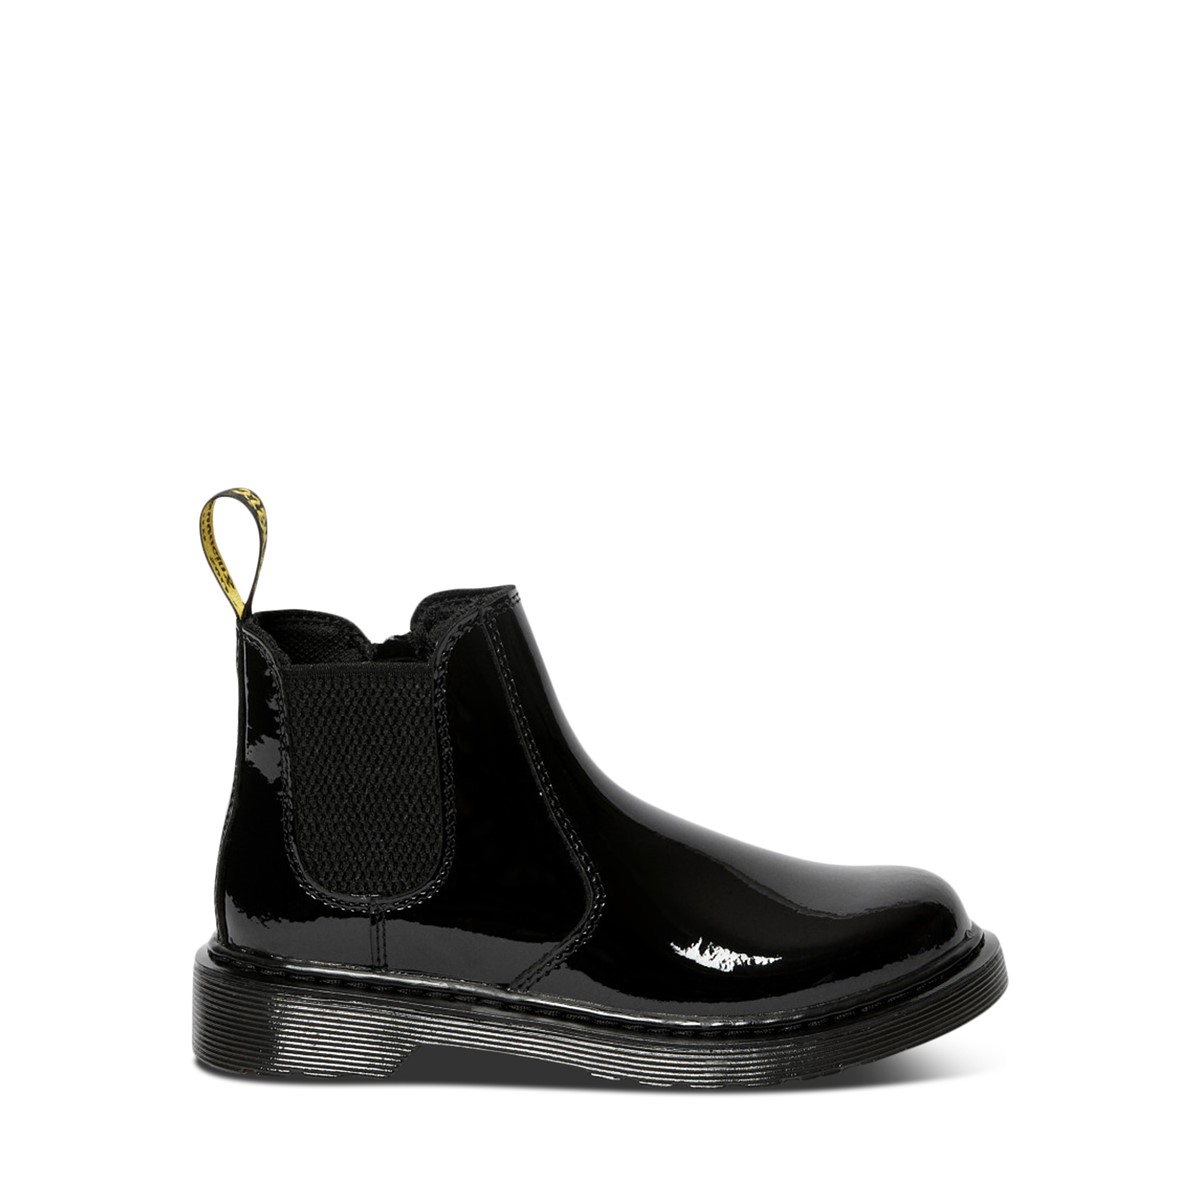 Little Kids' Patent Leather Chelsea Boots in Black